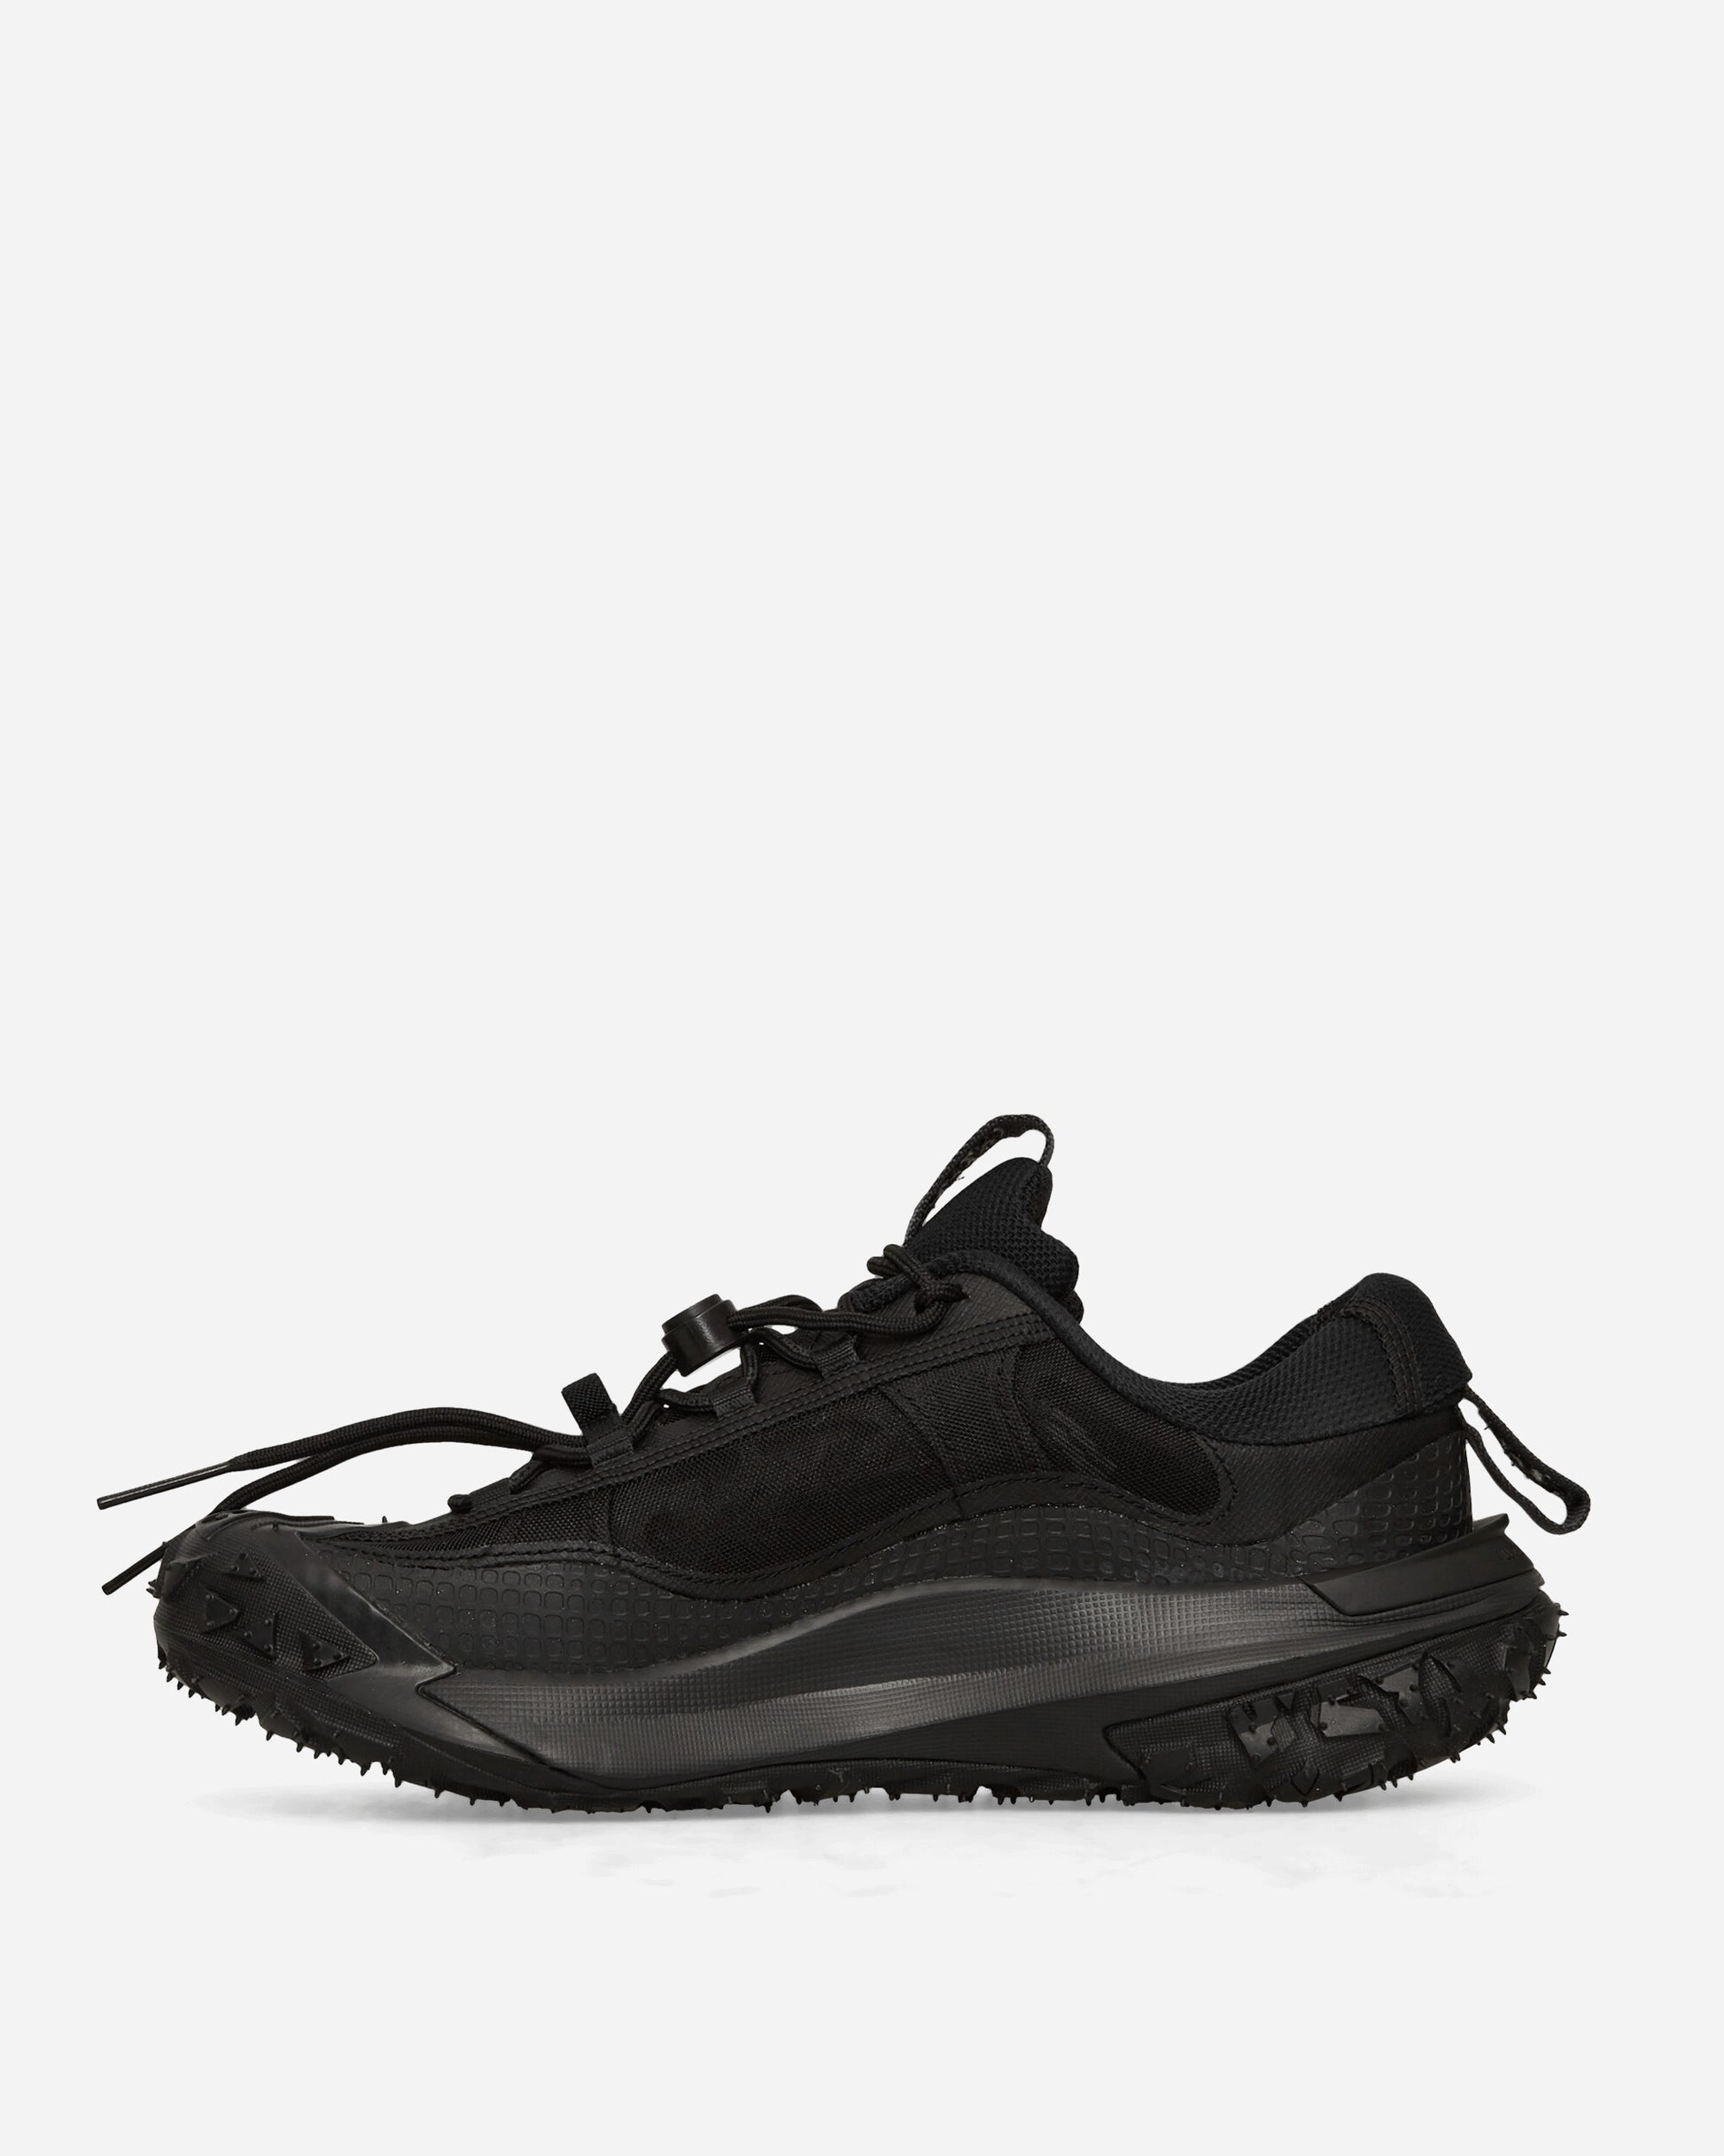 Nike Acg Mountain Fly 2 Low Black/Anthracite Sneakers Low DV7903-002